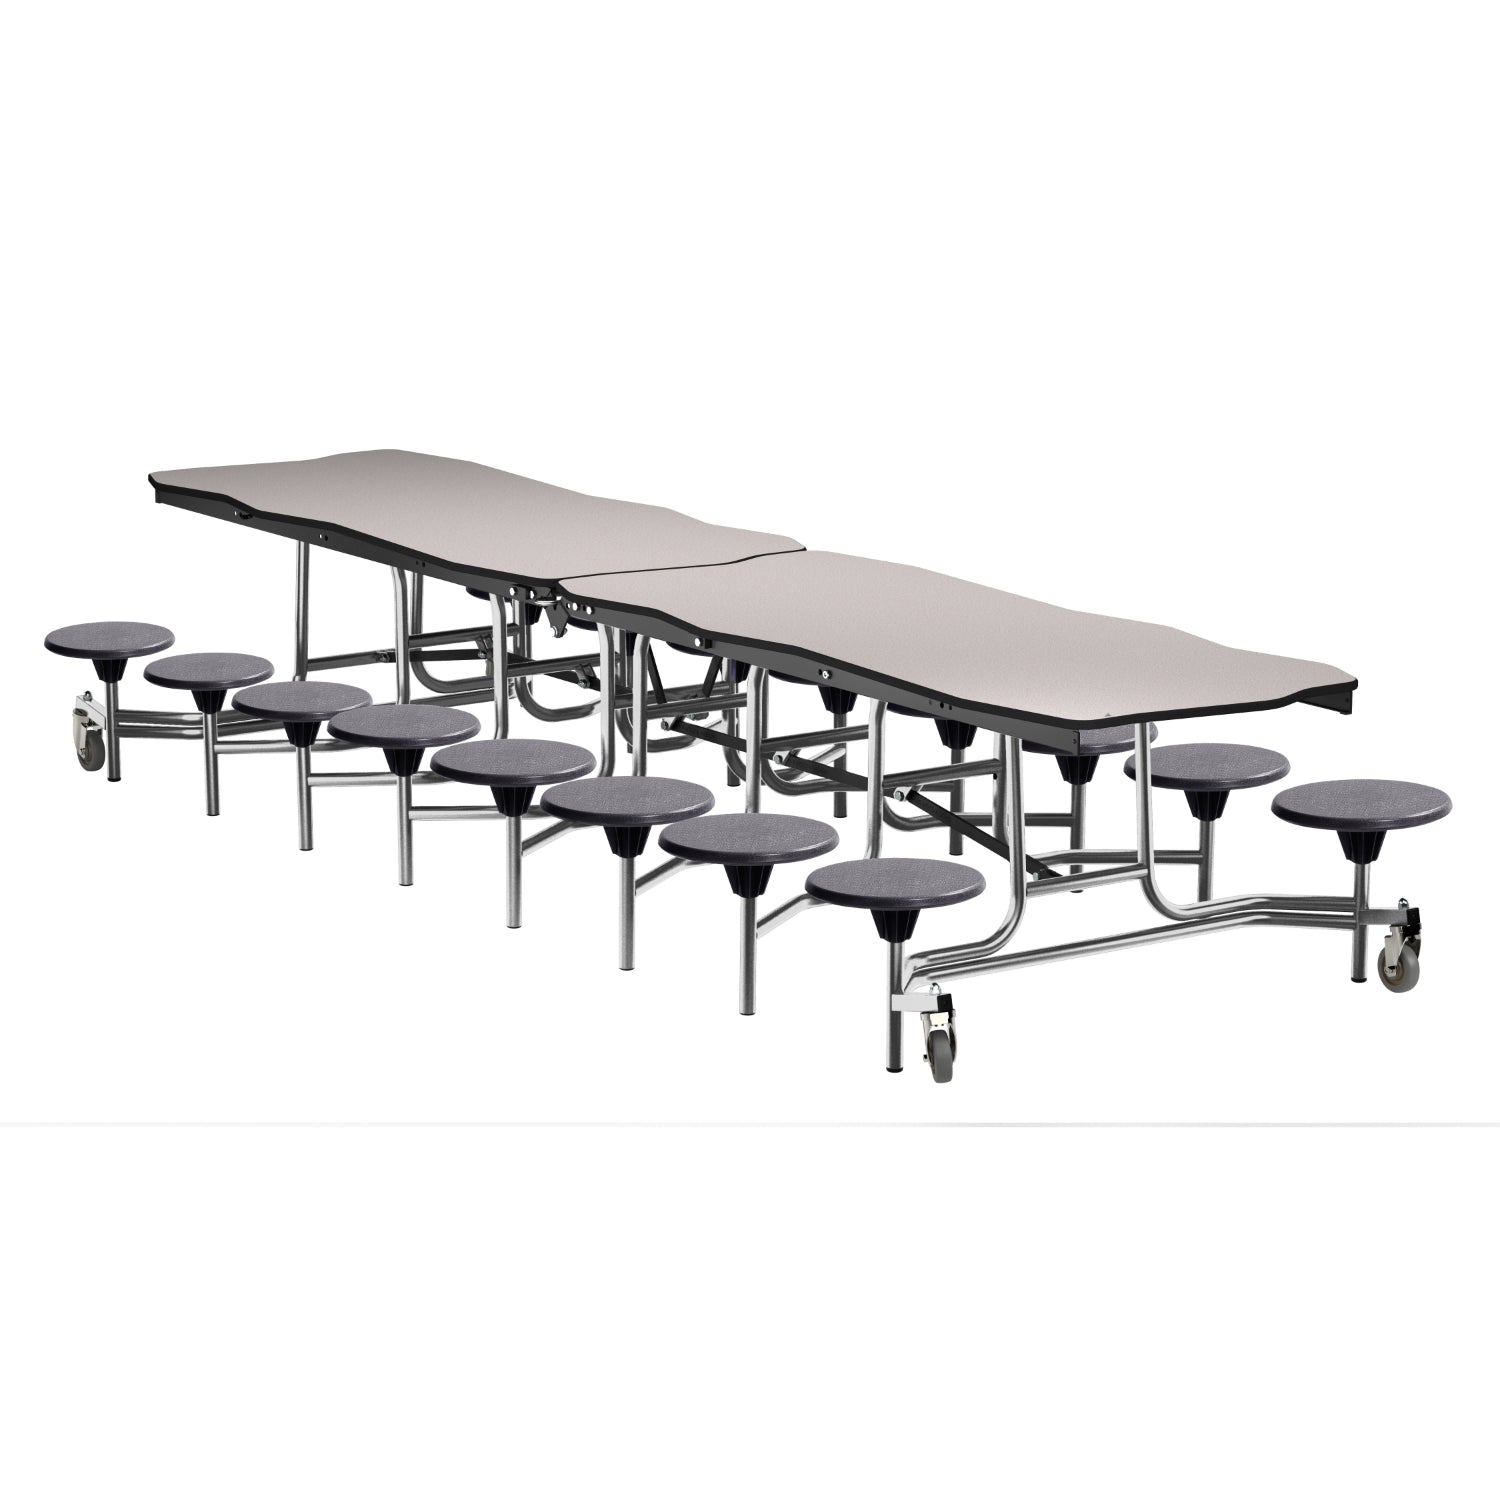 Mobile Cafeteria Table with 16 Stools, 12' Bedrock, MDF Core, Black ProtectEdge, Chrome Frame